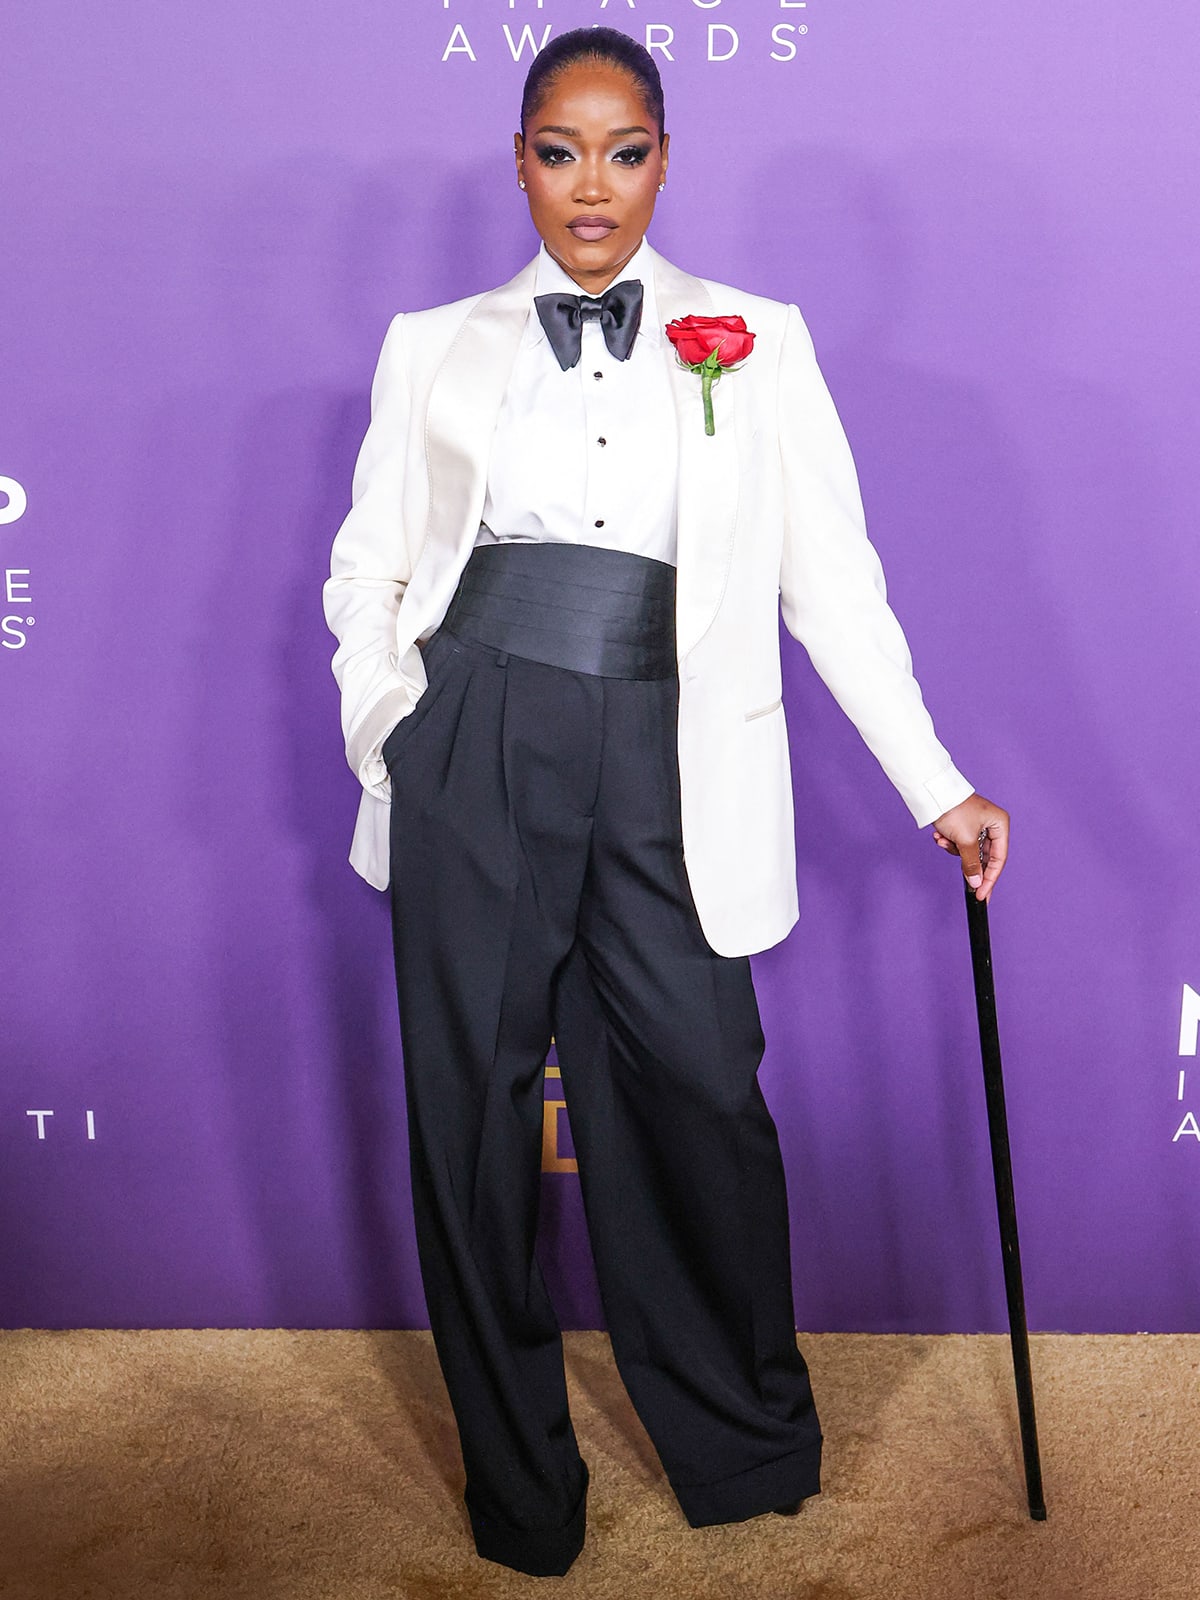 Keke Palmer looks sharp in a white tuxedo jacket with a white shirt and a black bowtie from Tom Ford teamed with a pair of wide-leg trousers and pumps by Dolce & Gabbana